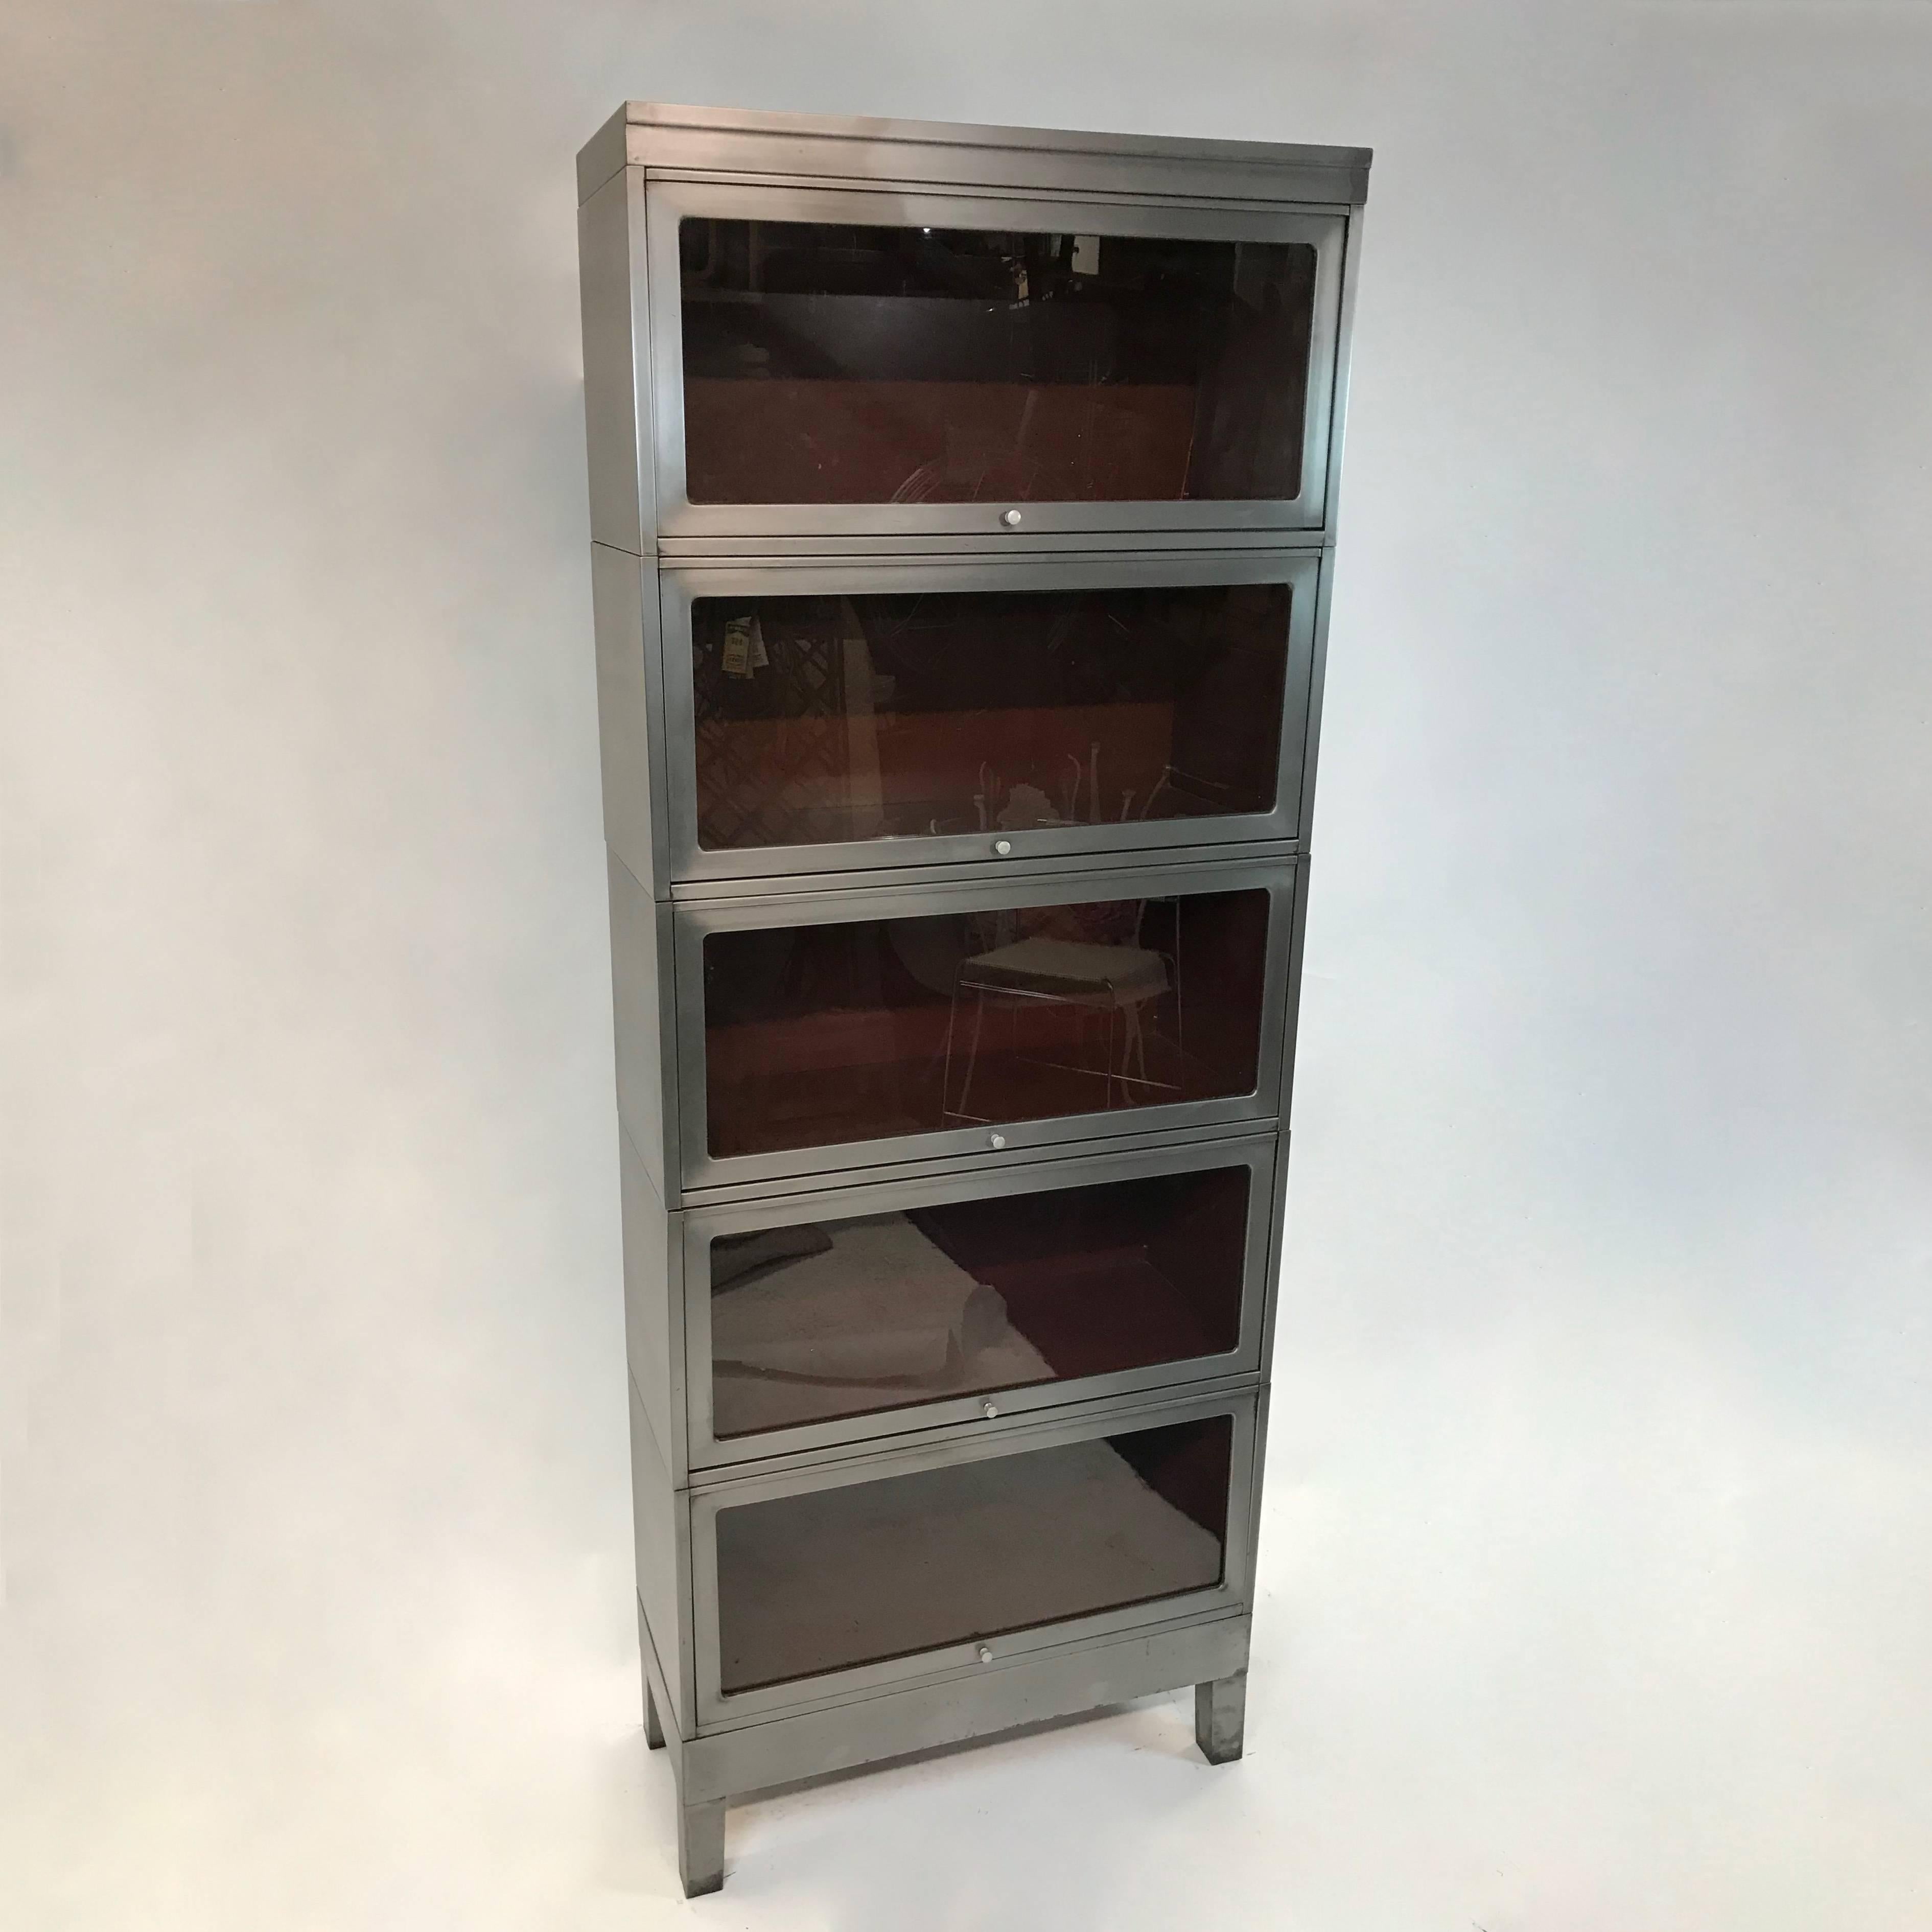 Midcentury, industrial, barrister bookcase, features six interlocking, stackable cases with glass front doors that slide to open has a newly brushed steel exterior and contrasting, original maroon paint interiors. Each case is 14.75 inches height